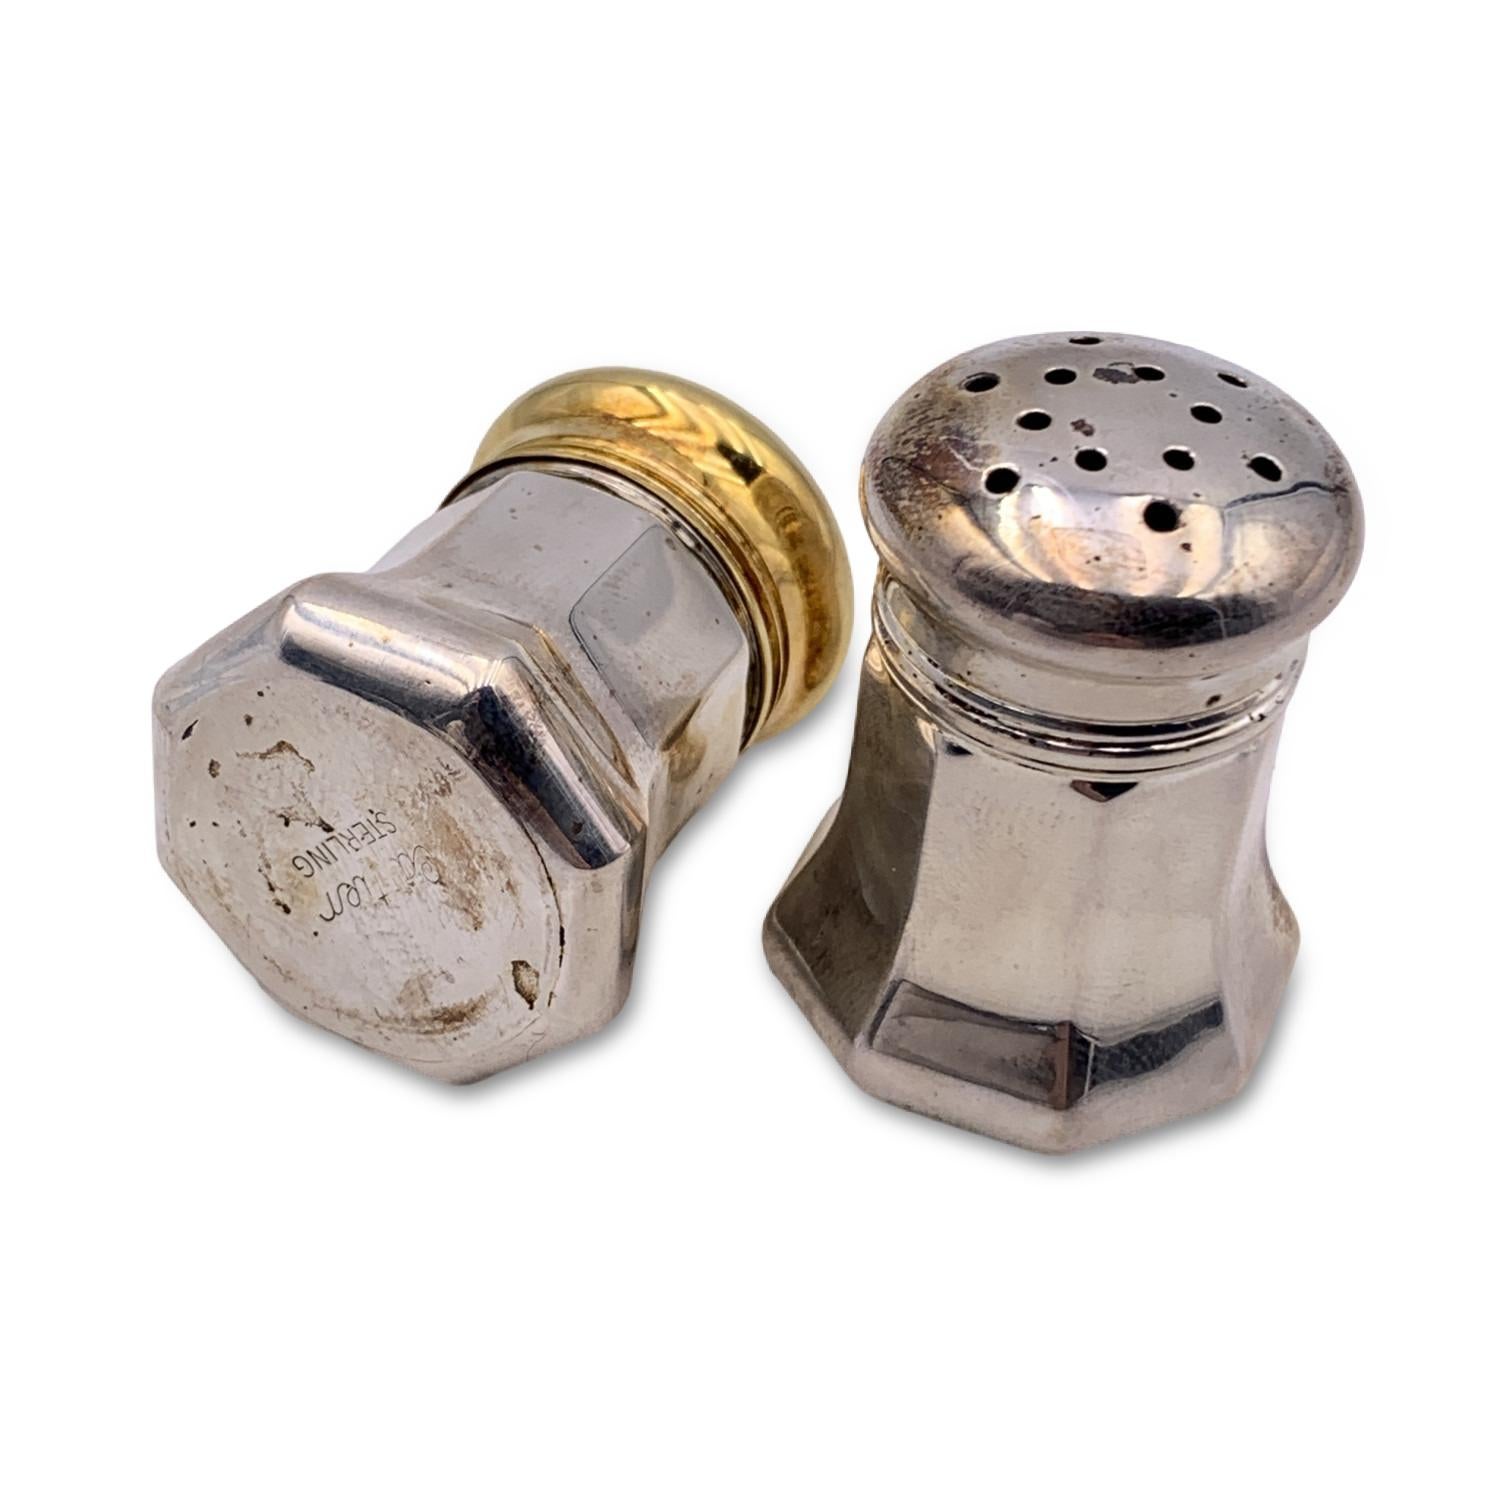 Vintage Cartier mini salt & pepper shakers in sterling silver. One of the shaker has a gold wash lid. Presented in red case. Measurements (height): 1.25 inches - 3.2 cm / (length):1 inch - 2,5 cm. Marked 'Cartier Sterling' on the